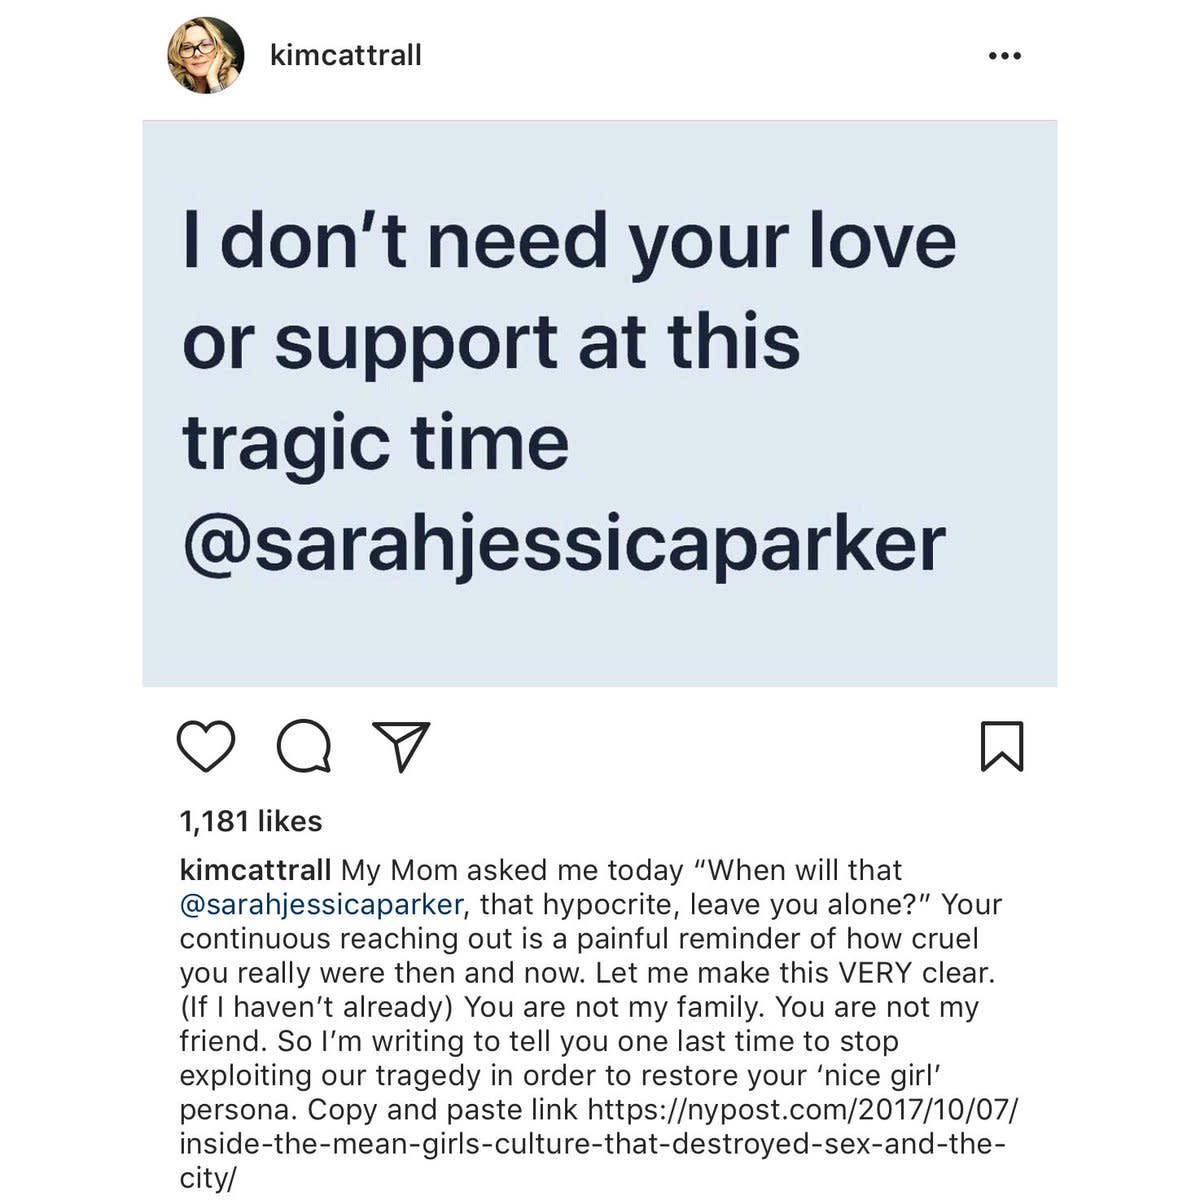 Kim Cattrall's Tweeted response to Sarah Jessica Parker's "love and support" after the death of Cattrall's brother.